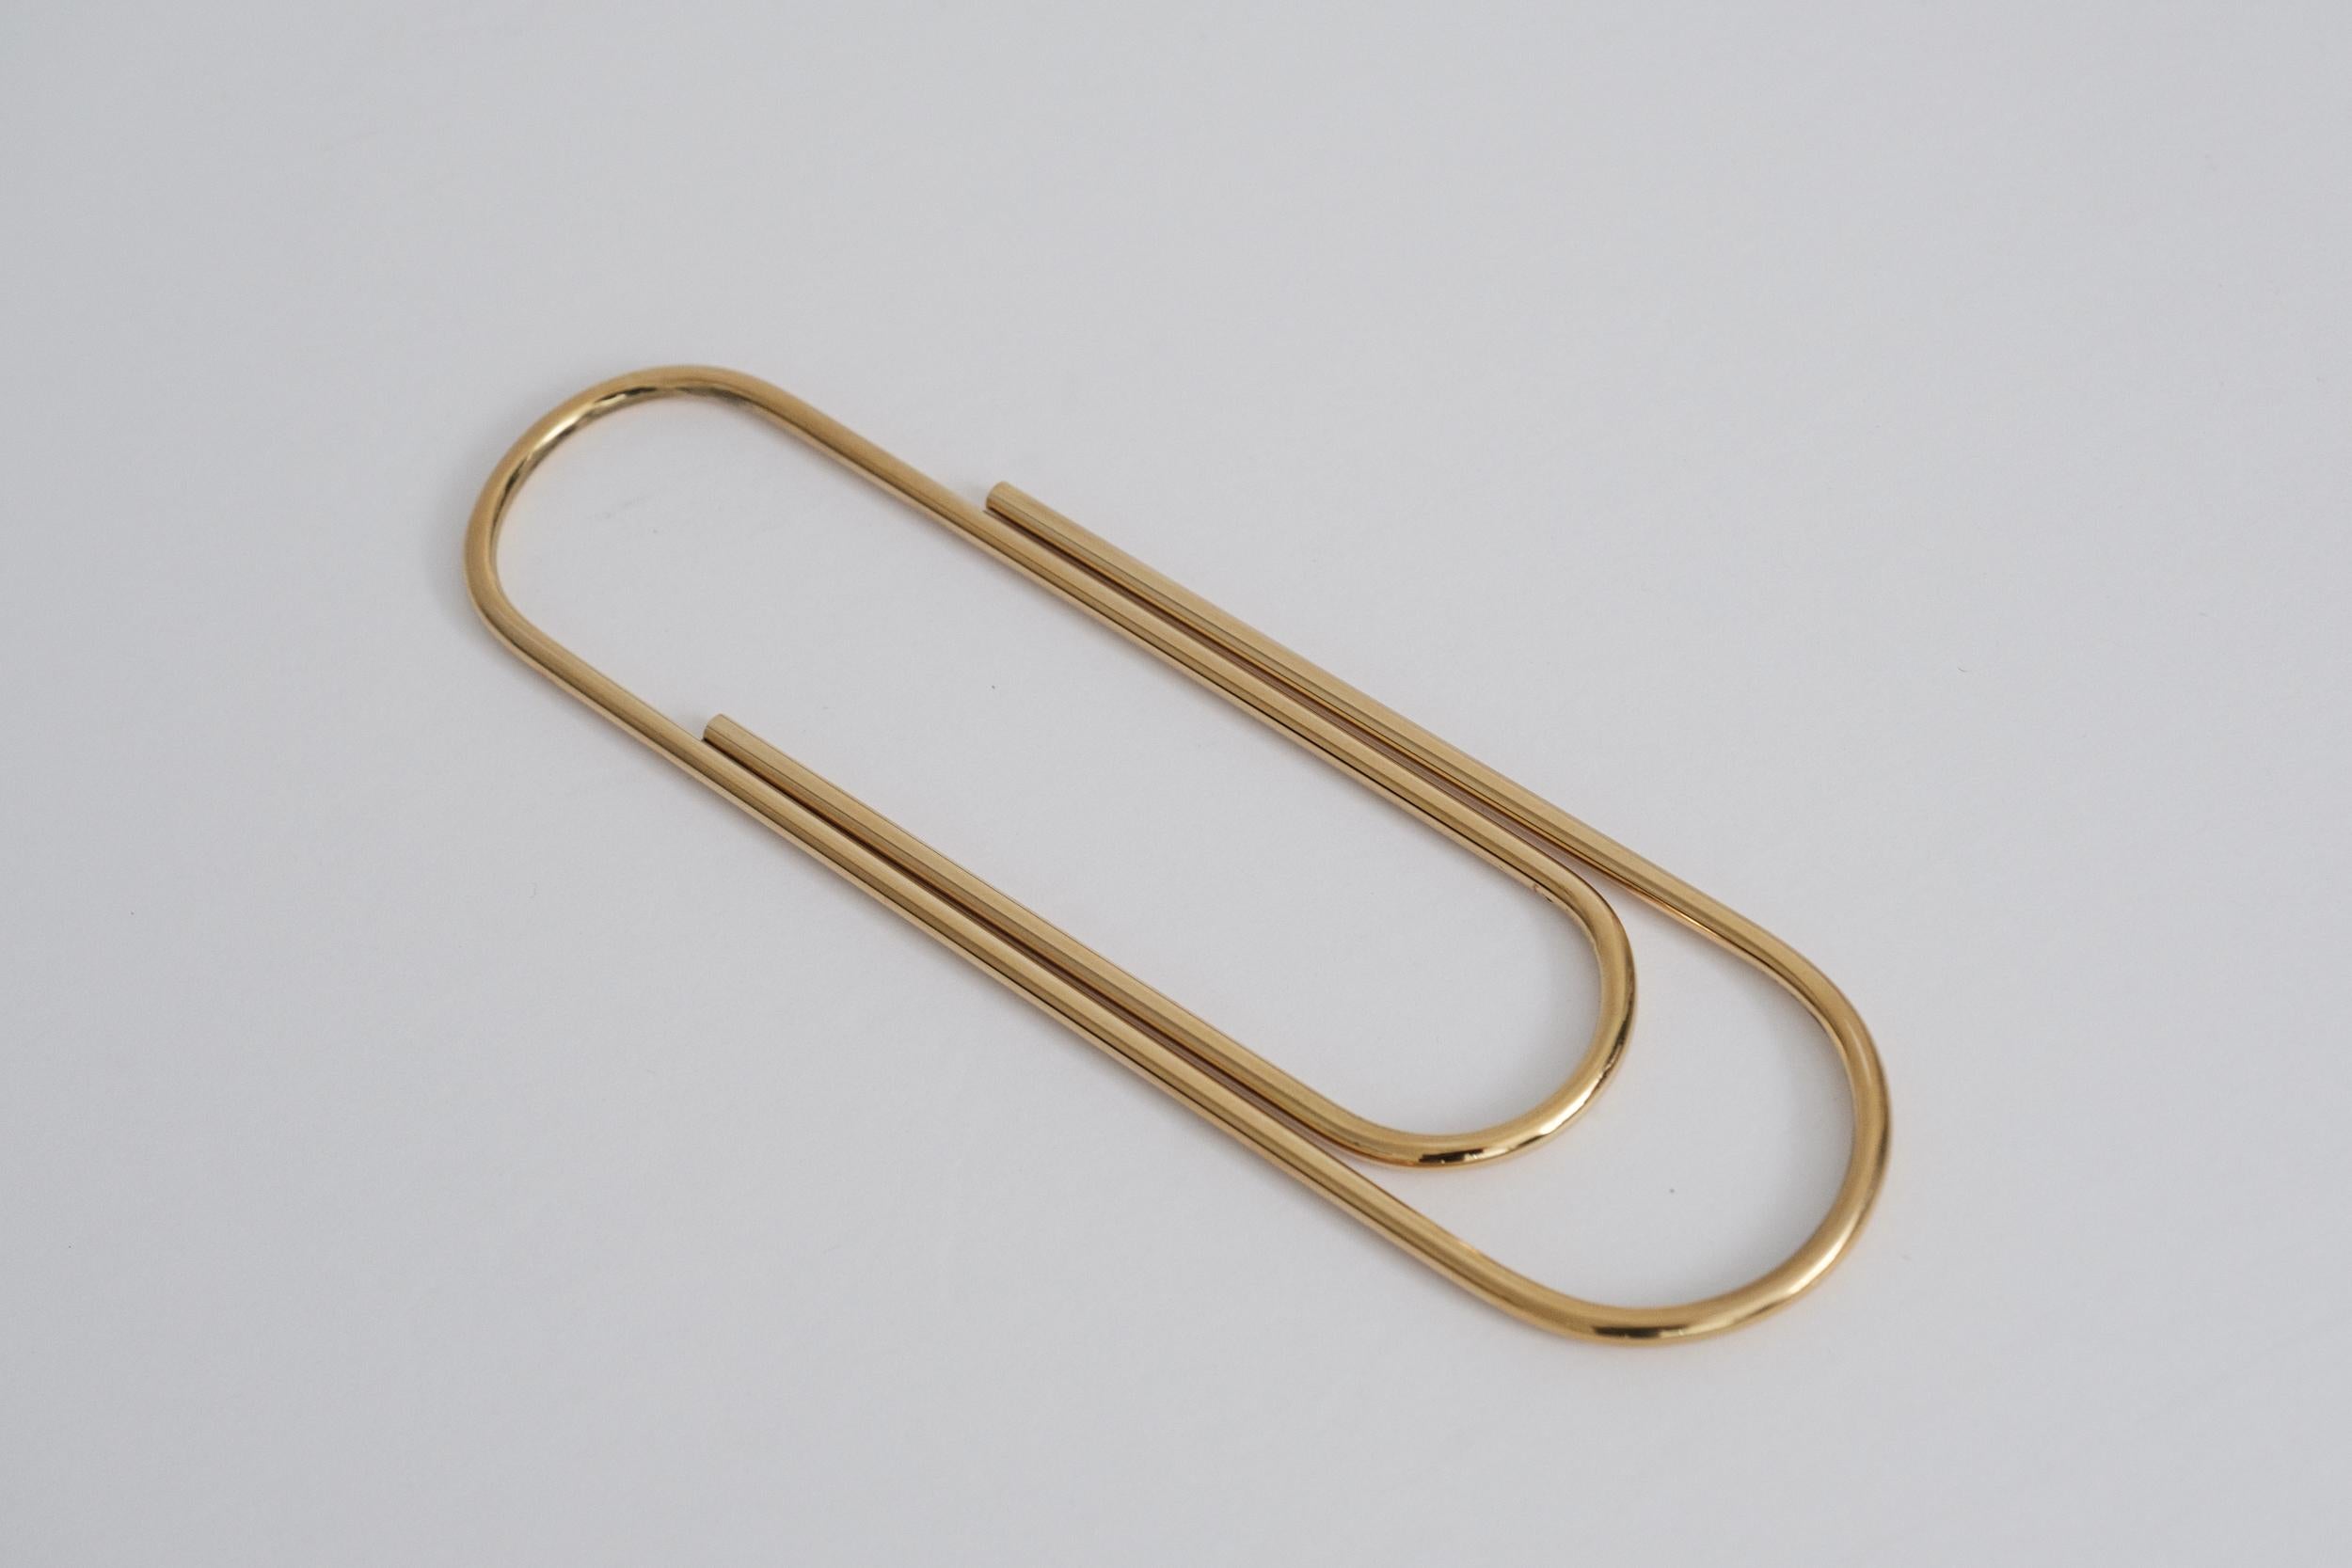 Large Carl Auböck Model #4751 'Paperclip' Brass Paperweight For Sale 3